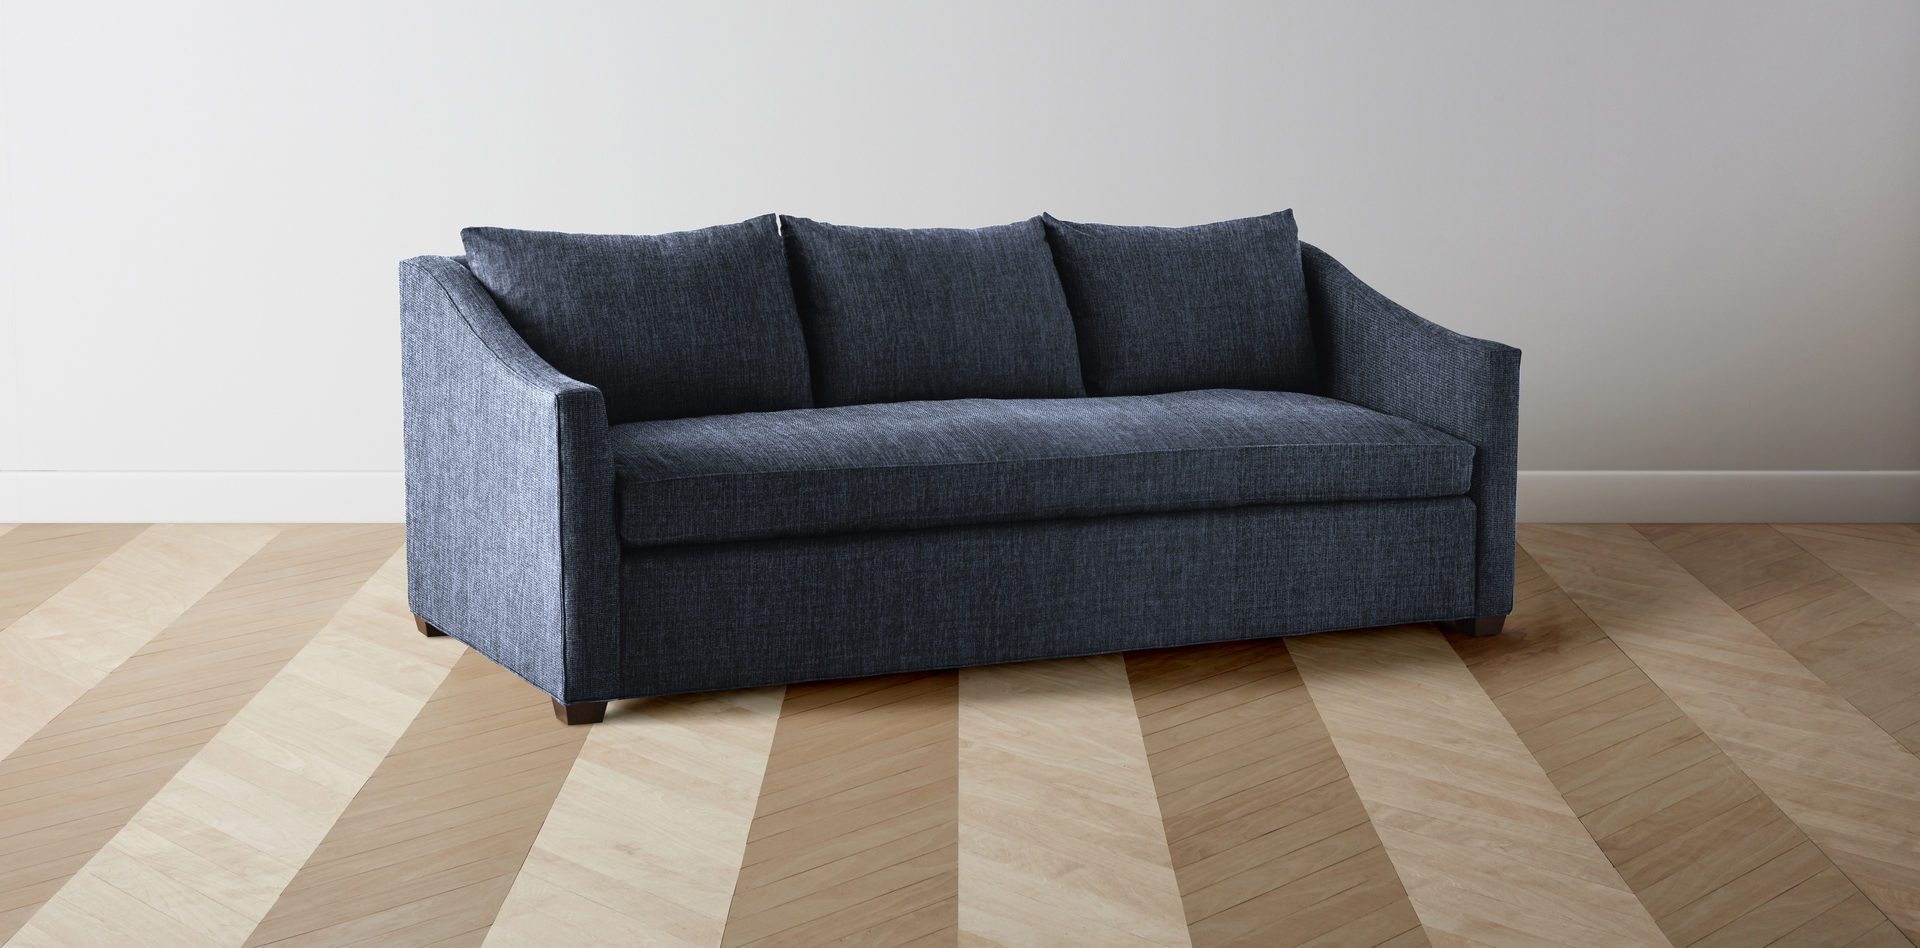 The Sullivan Sectional - Image 2